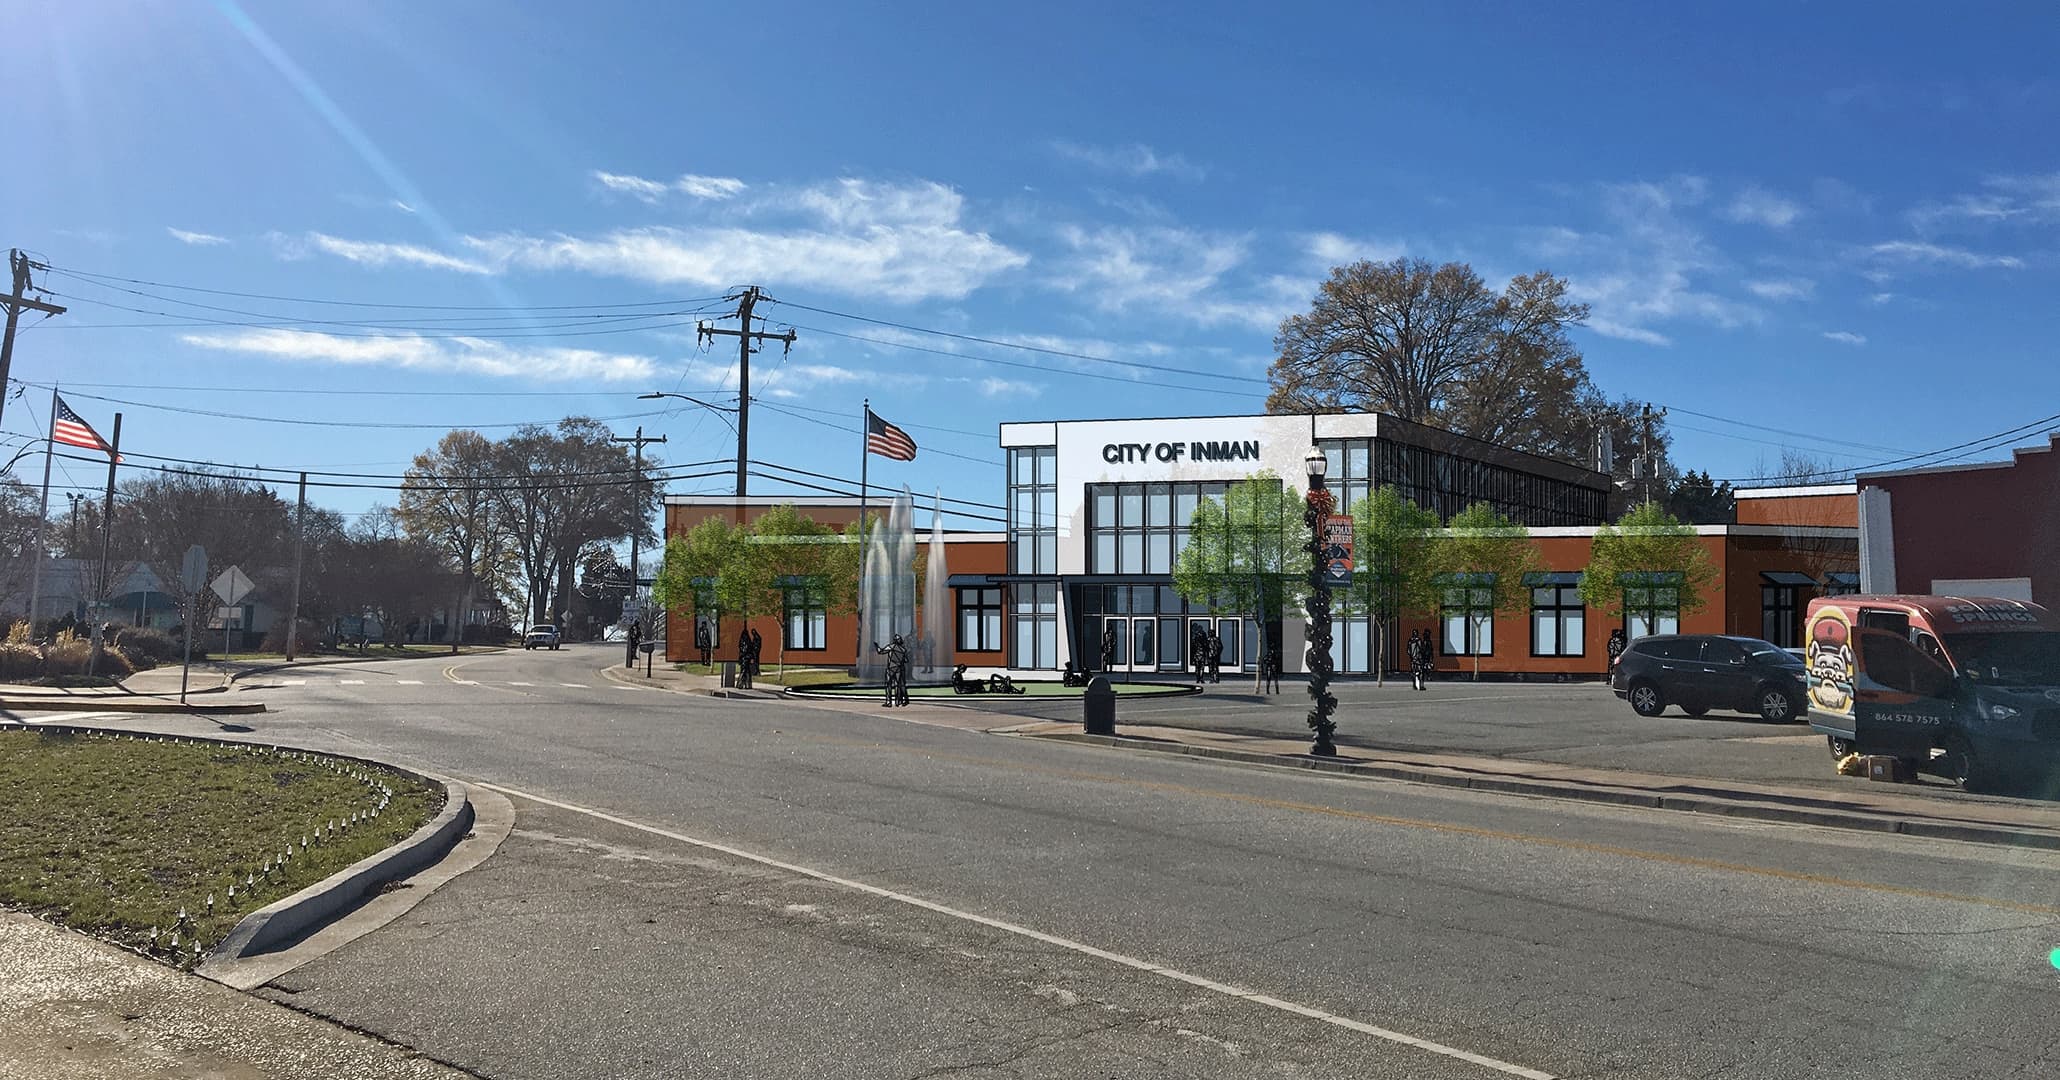 Boudreaux architects and master planners designed a draft rendering of what a new city hall could look like for City of Inman.